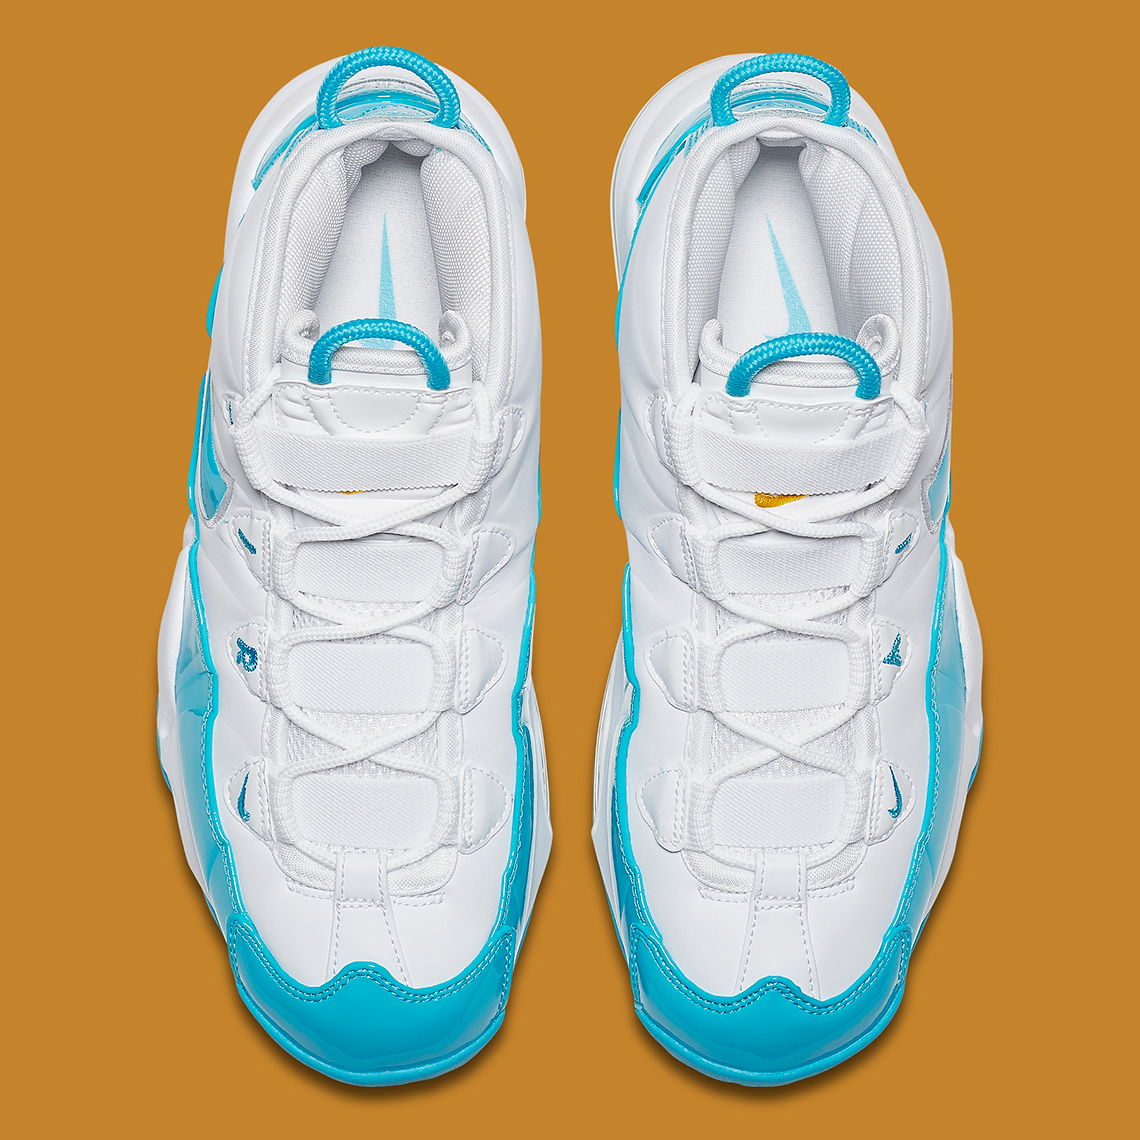 Nike Air Max Uptempo 95 Blue Fury CK0892-100 Release Date | SneakerNews.com